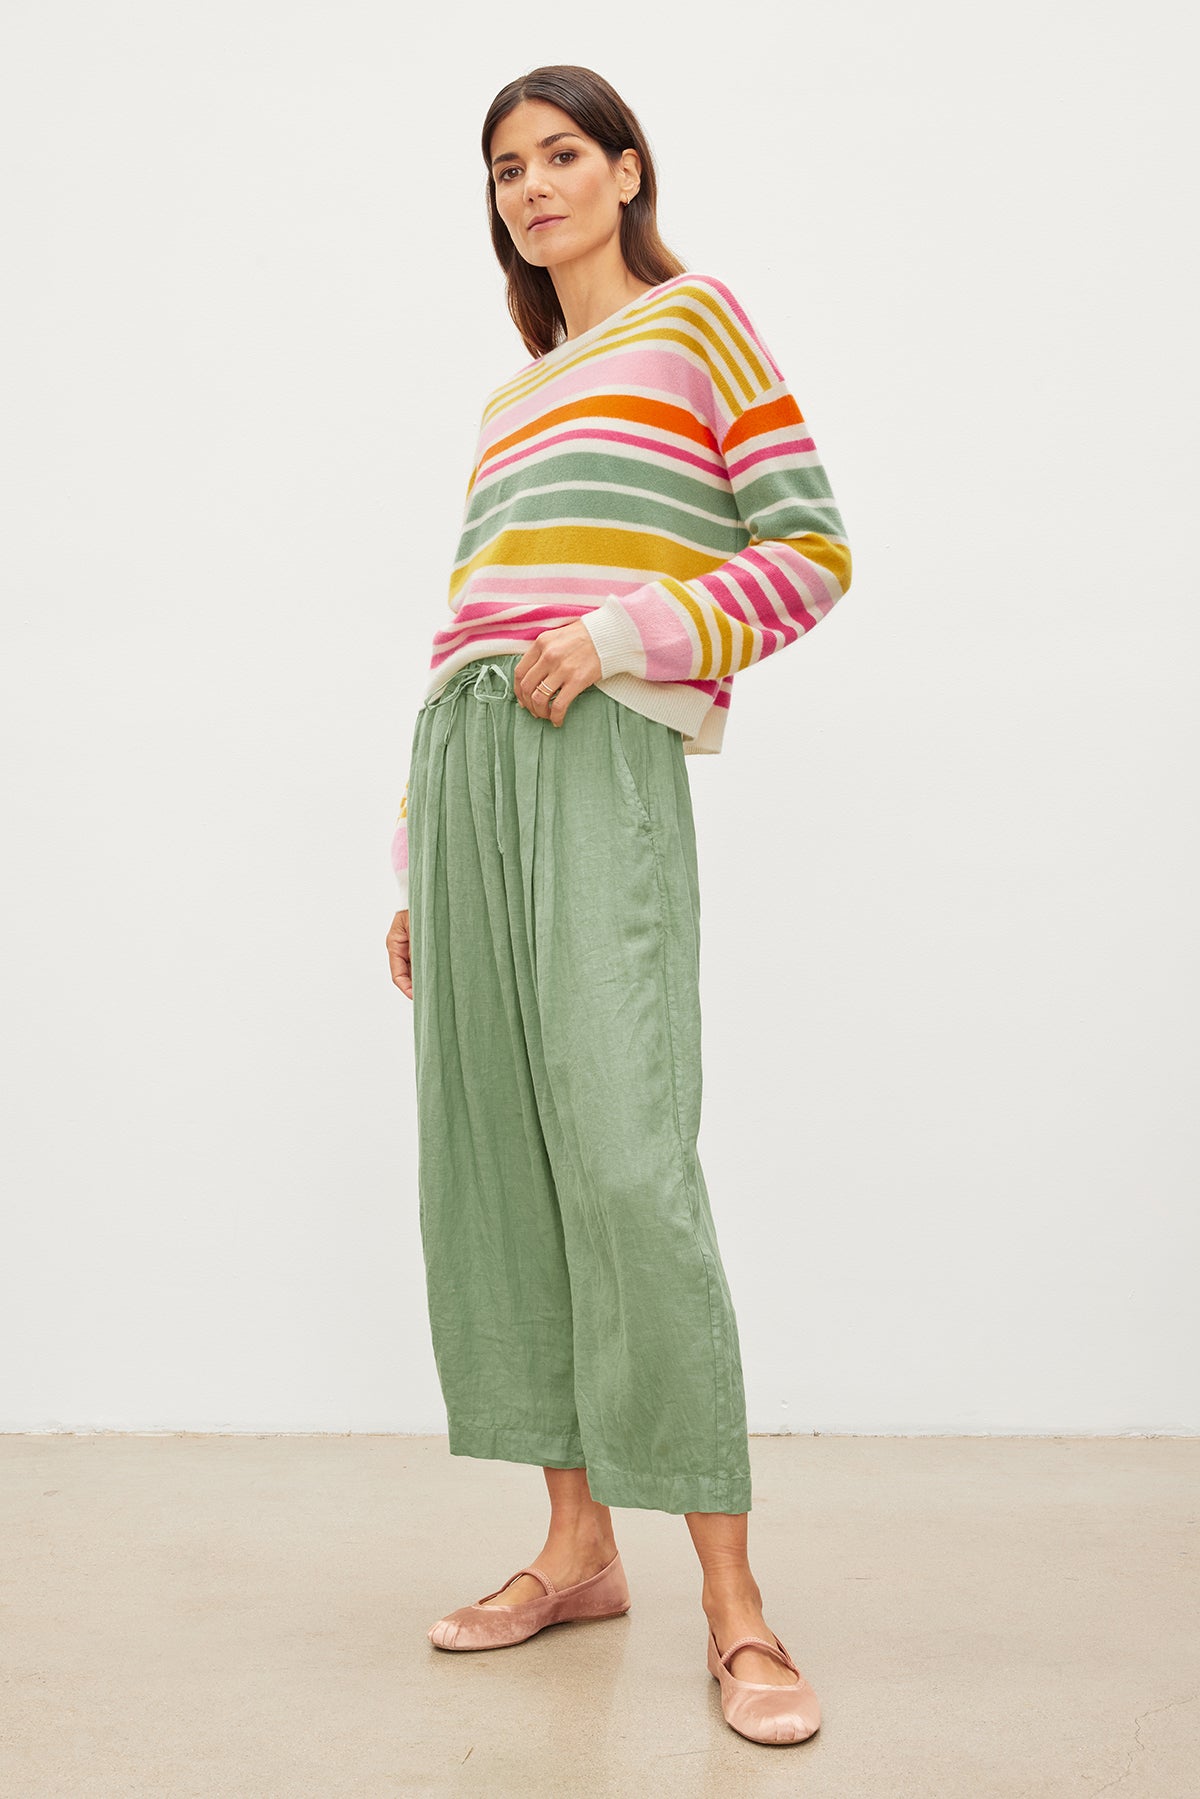 The model is wearing a Velvet by Graham & Spencer Hannah Linen Wide Leg Pant, featuring double pleats.-35982213316801